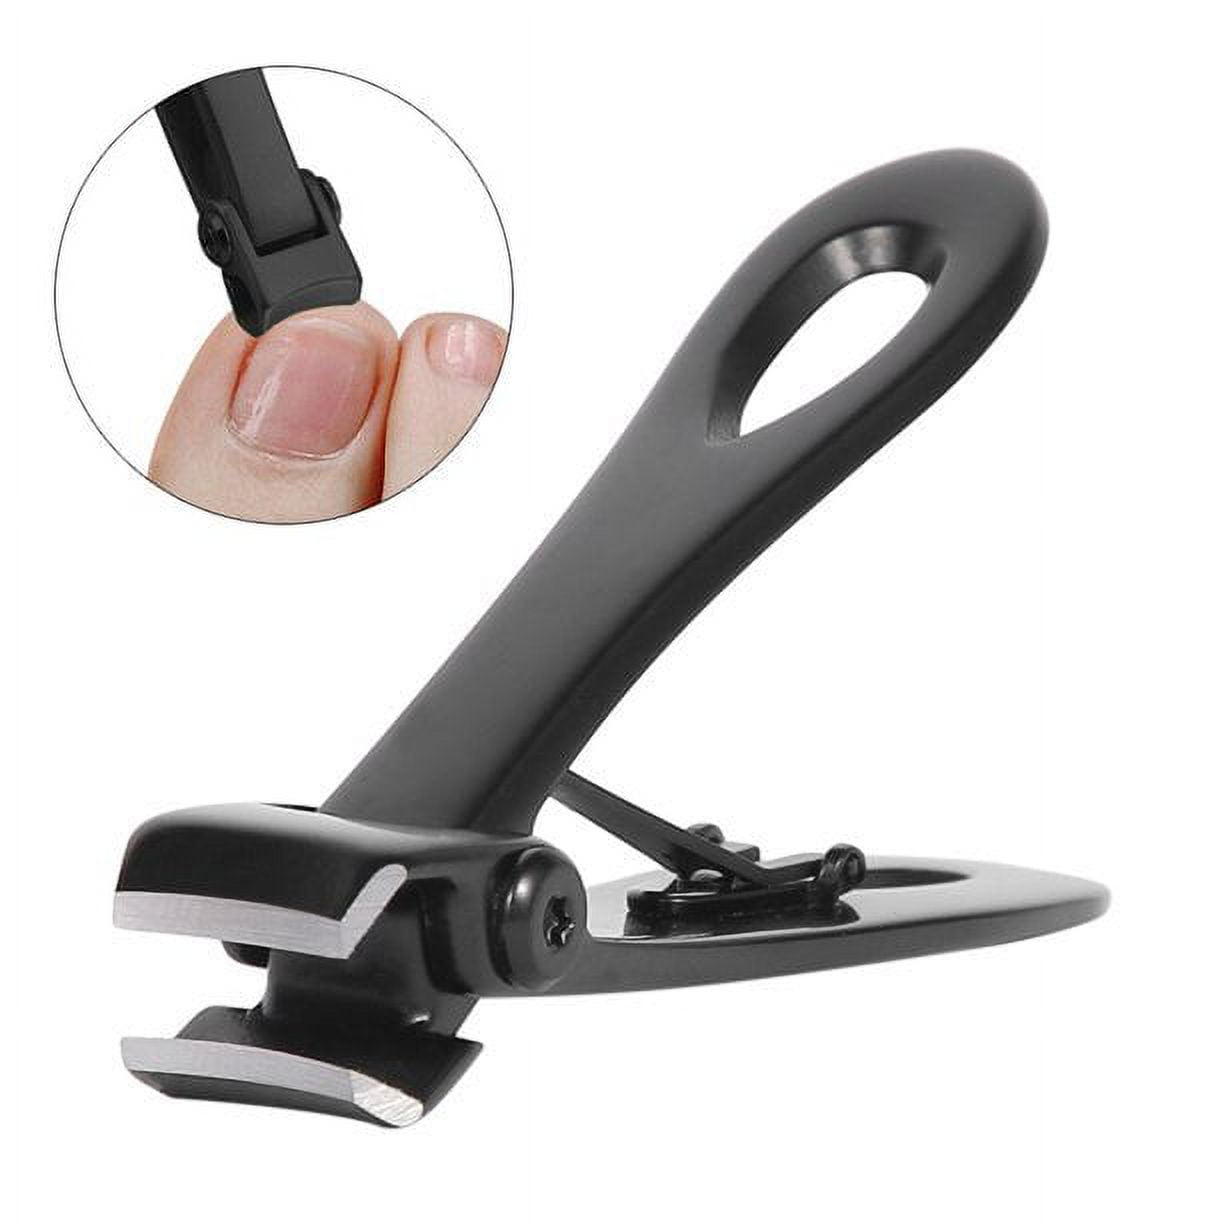 Eummy Nail Clipper Stainless Steel Wide Jaw Opening Toenail Cutter  Splash-proof Ergonomic Curve Sharp Fingernail Trimmer Heavy Duty Nail  Grooming Tool